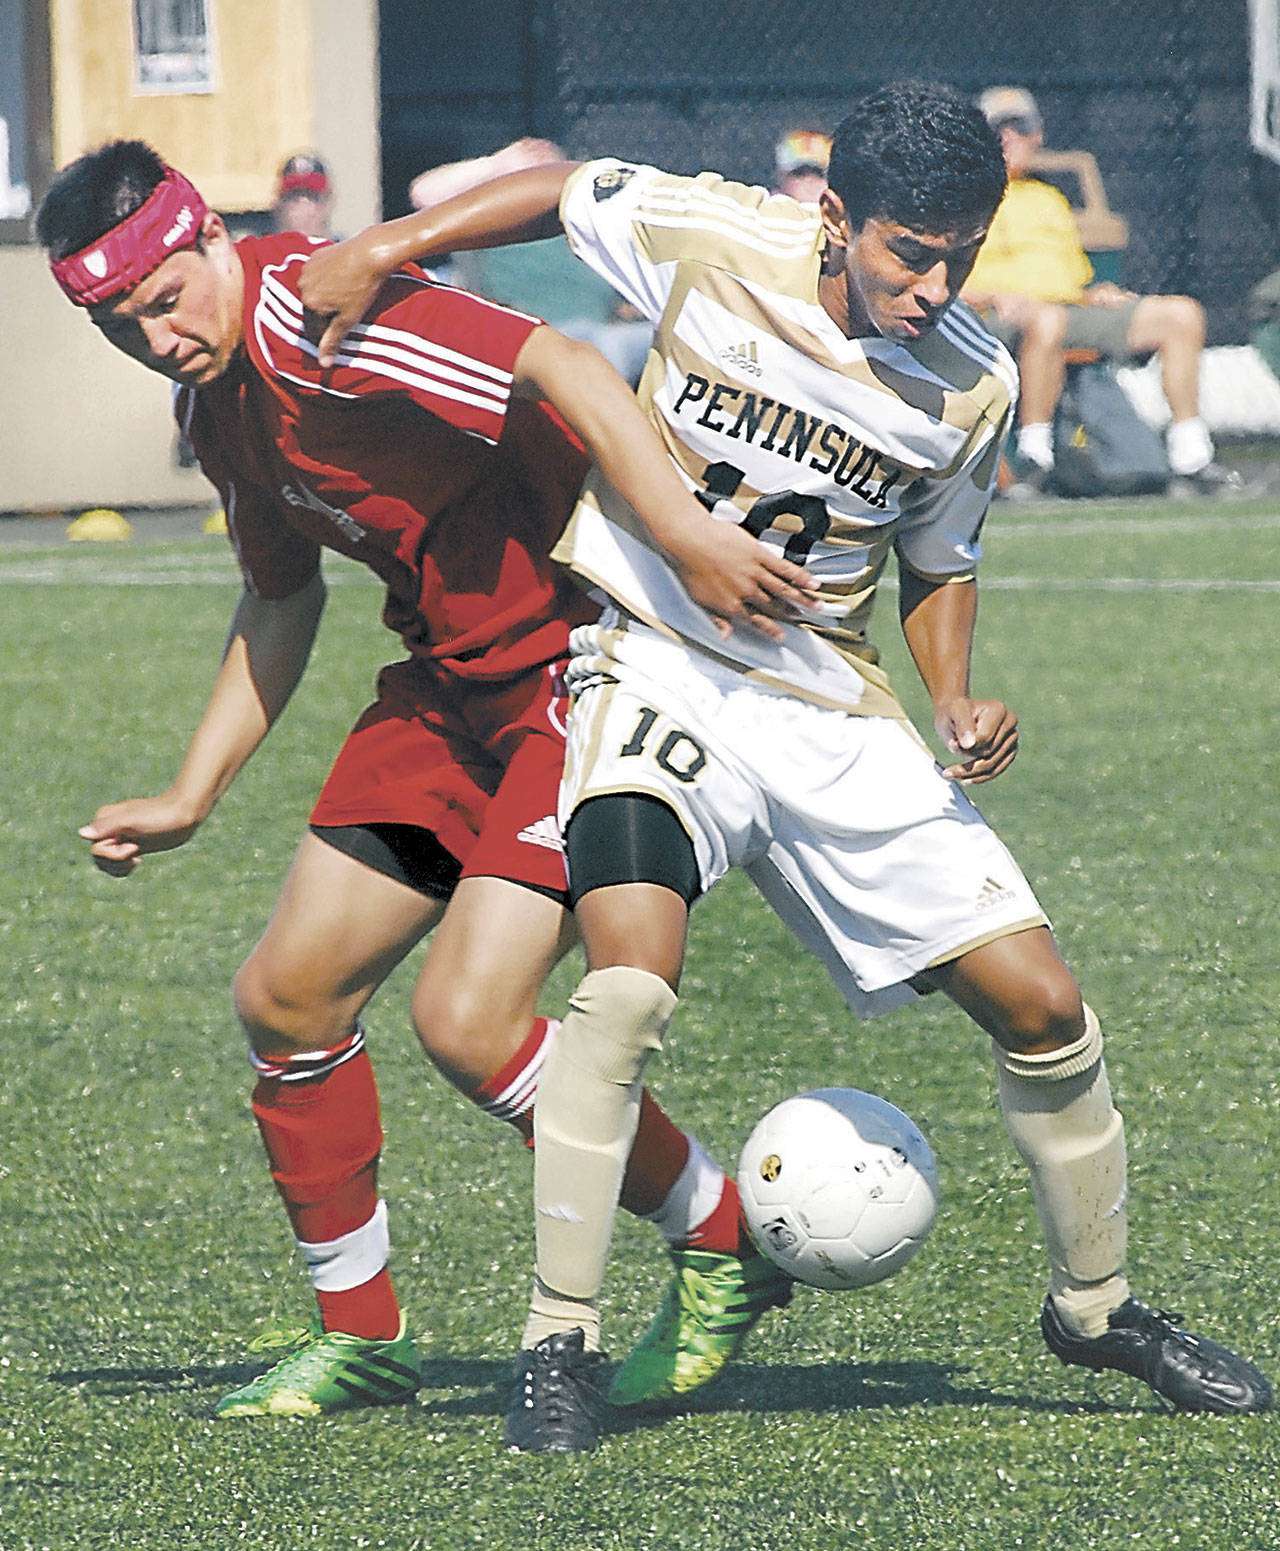 Southwestern Oregon’s Zachary Barker, left, battles with Peninsula’s Erick Urzua in 2013 in Port Angeles. The NWAC-champion 2012 and 2013 Pirate men’s and women’s soccer teams will be inducted into the Pirates Hall of Fame along with longtime basketball scorekeeper Bill Peterson on Sept. 25. (Keith Thorpe/Peninsula Daily News)